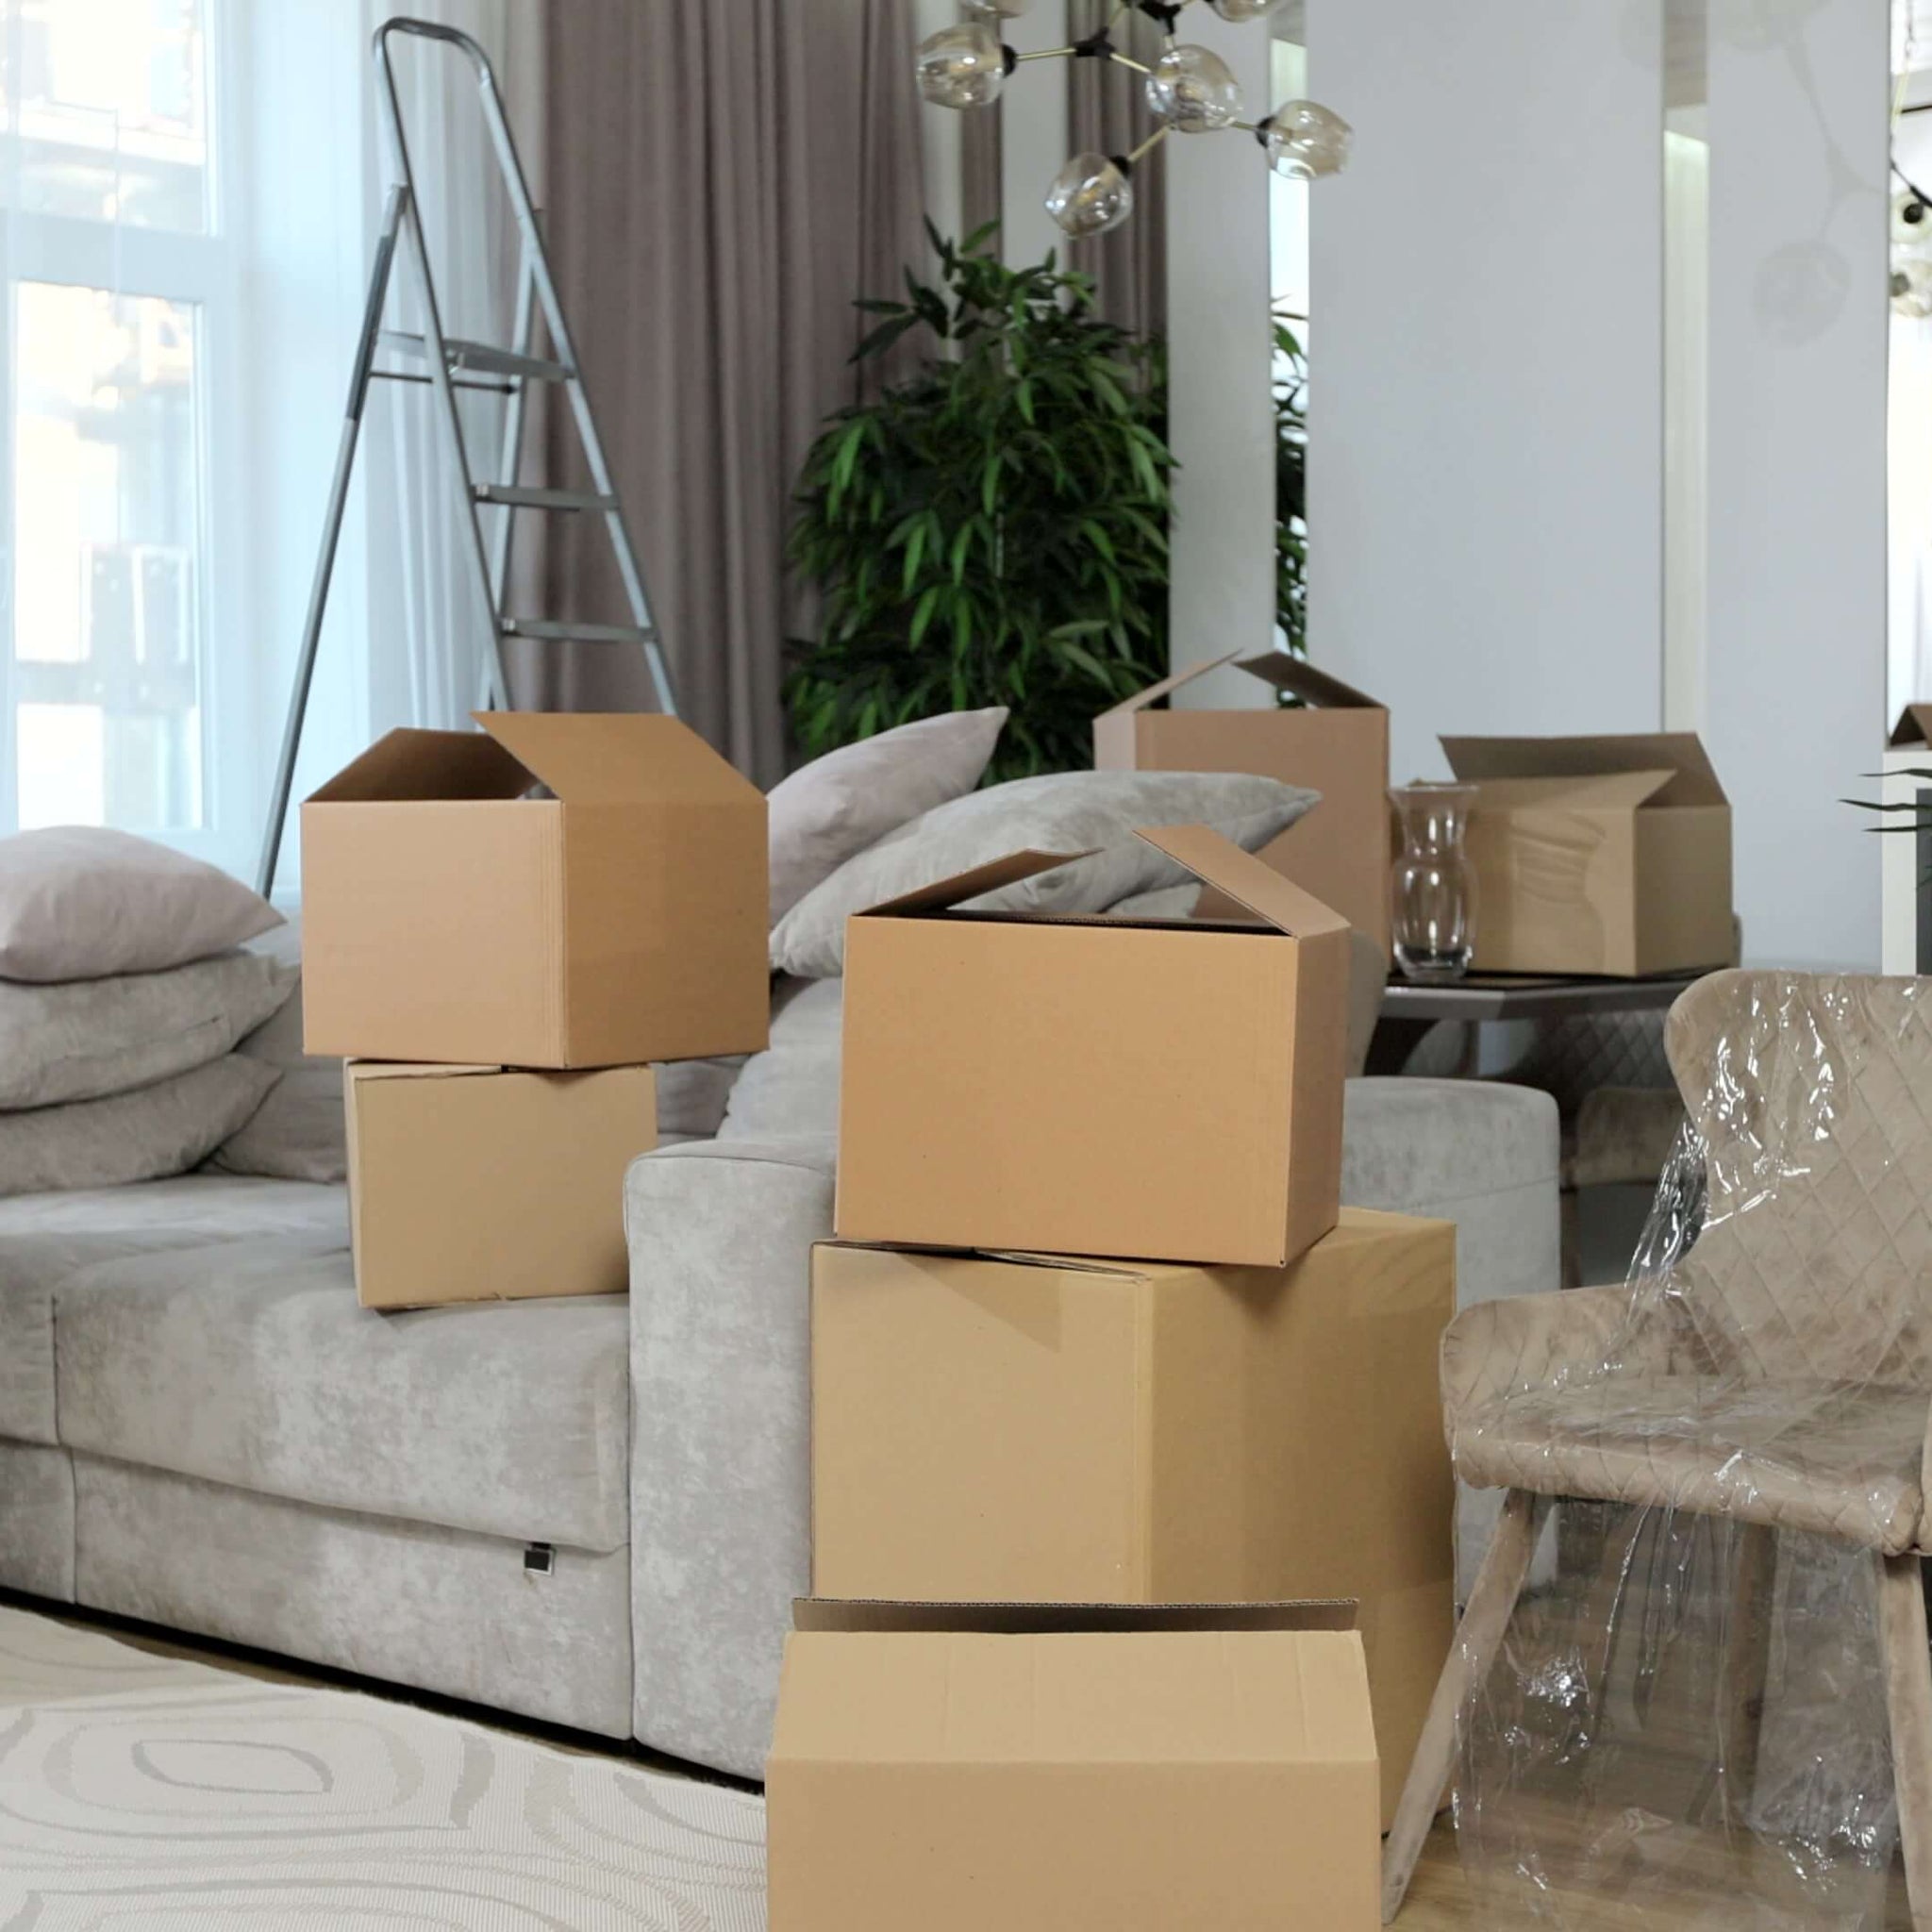 Moving to a new house? Here’s a simple checklist for a smooth transition